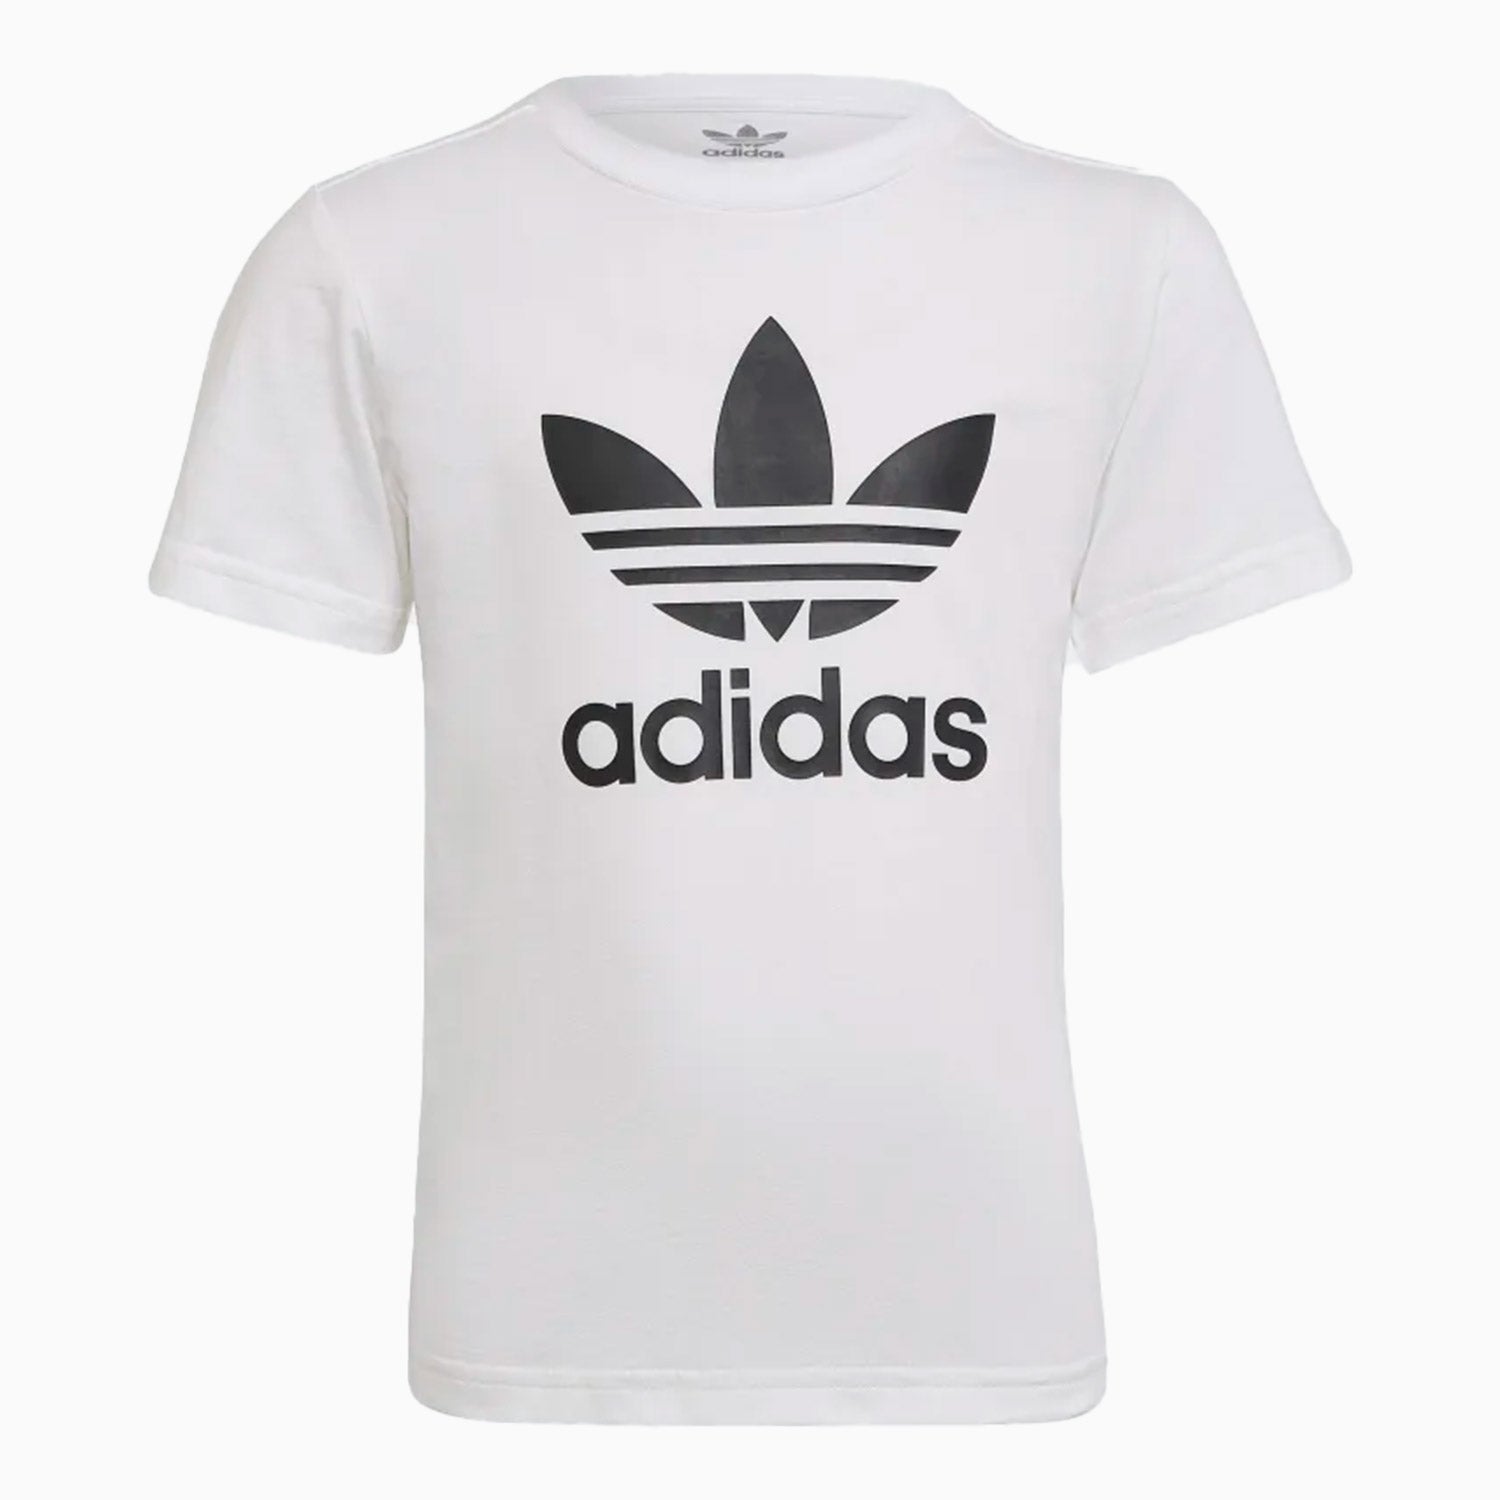 adidas-kids-short-and-t-shirt-set-outfit-hk2968